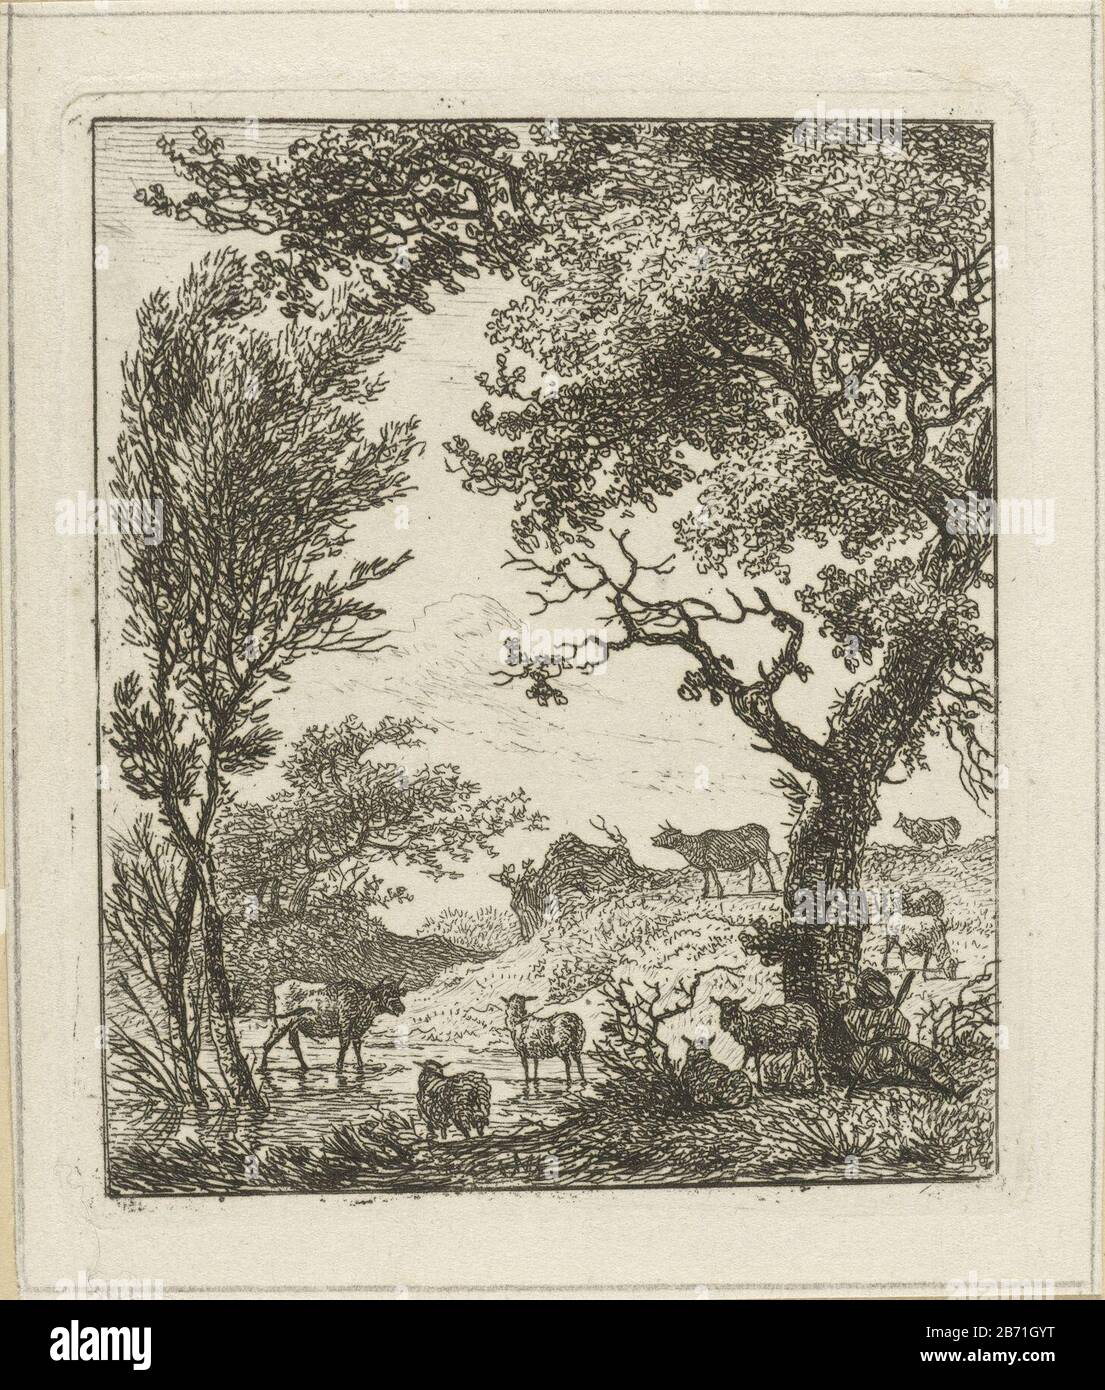 Landschap met kudde vee a herd of cows and sheep in a hilly landscape with trees and shallow water. Manufacturer : printmaker Hermanus FockPlaats manufacture: Amsterdam Date: 1781 - 1822 Physical features: etching material: paper Technique: etching dimensions: plate edge: h 82 mm × b 71 mm Subject: cattle Stock Photo